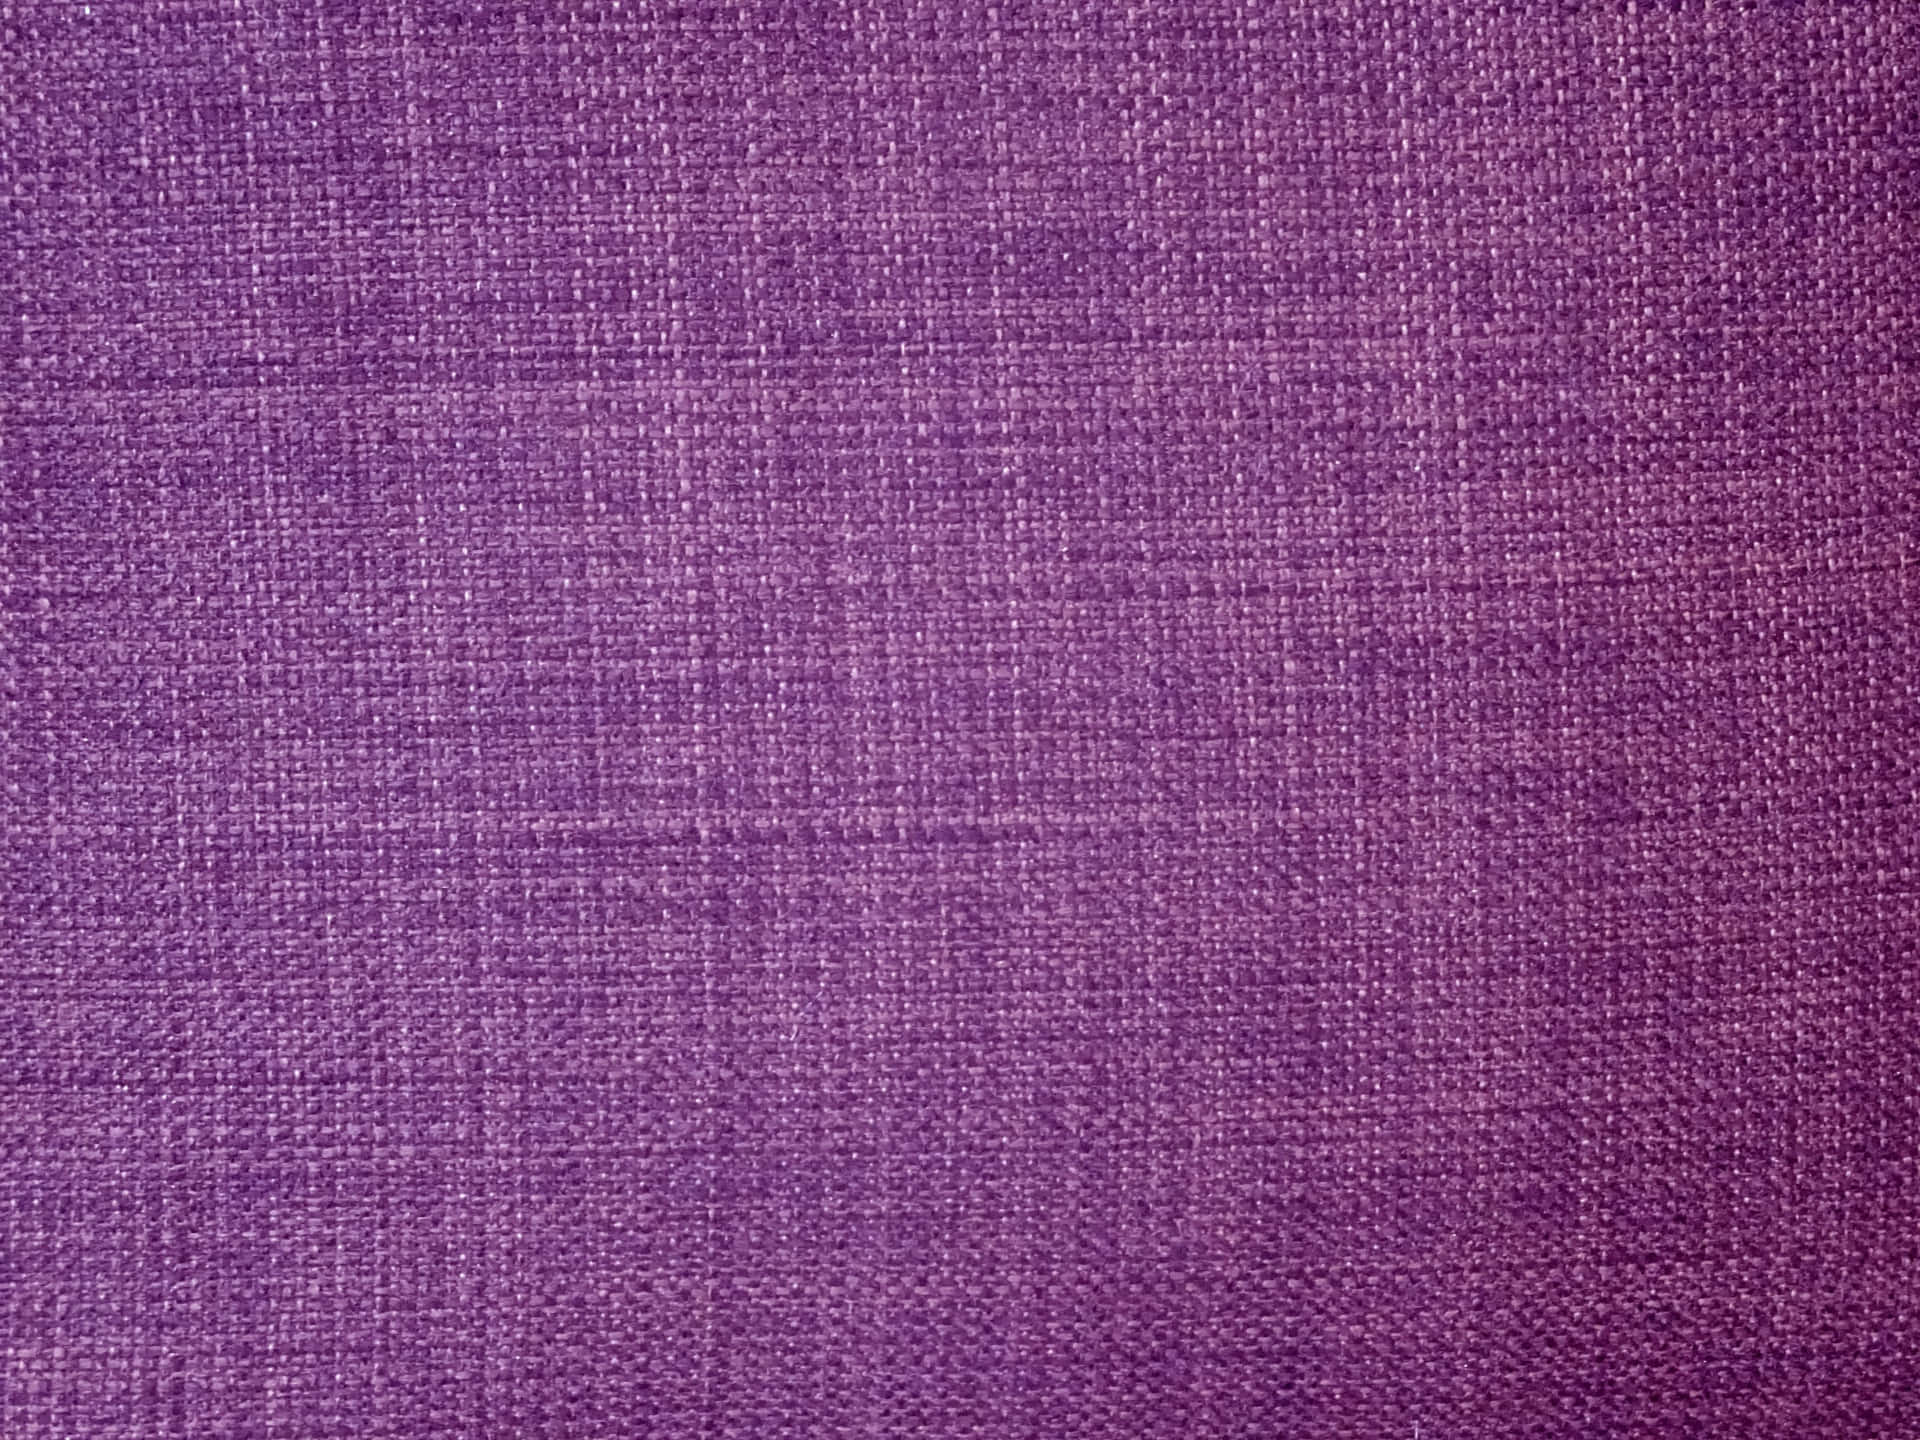 Introducing Purple Fabrics: Feel the Soft Touch and Rich Texture Wallpaper